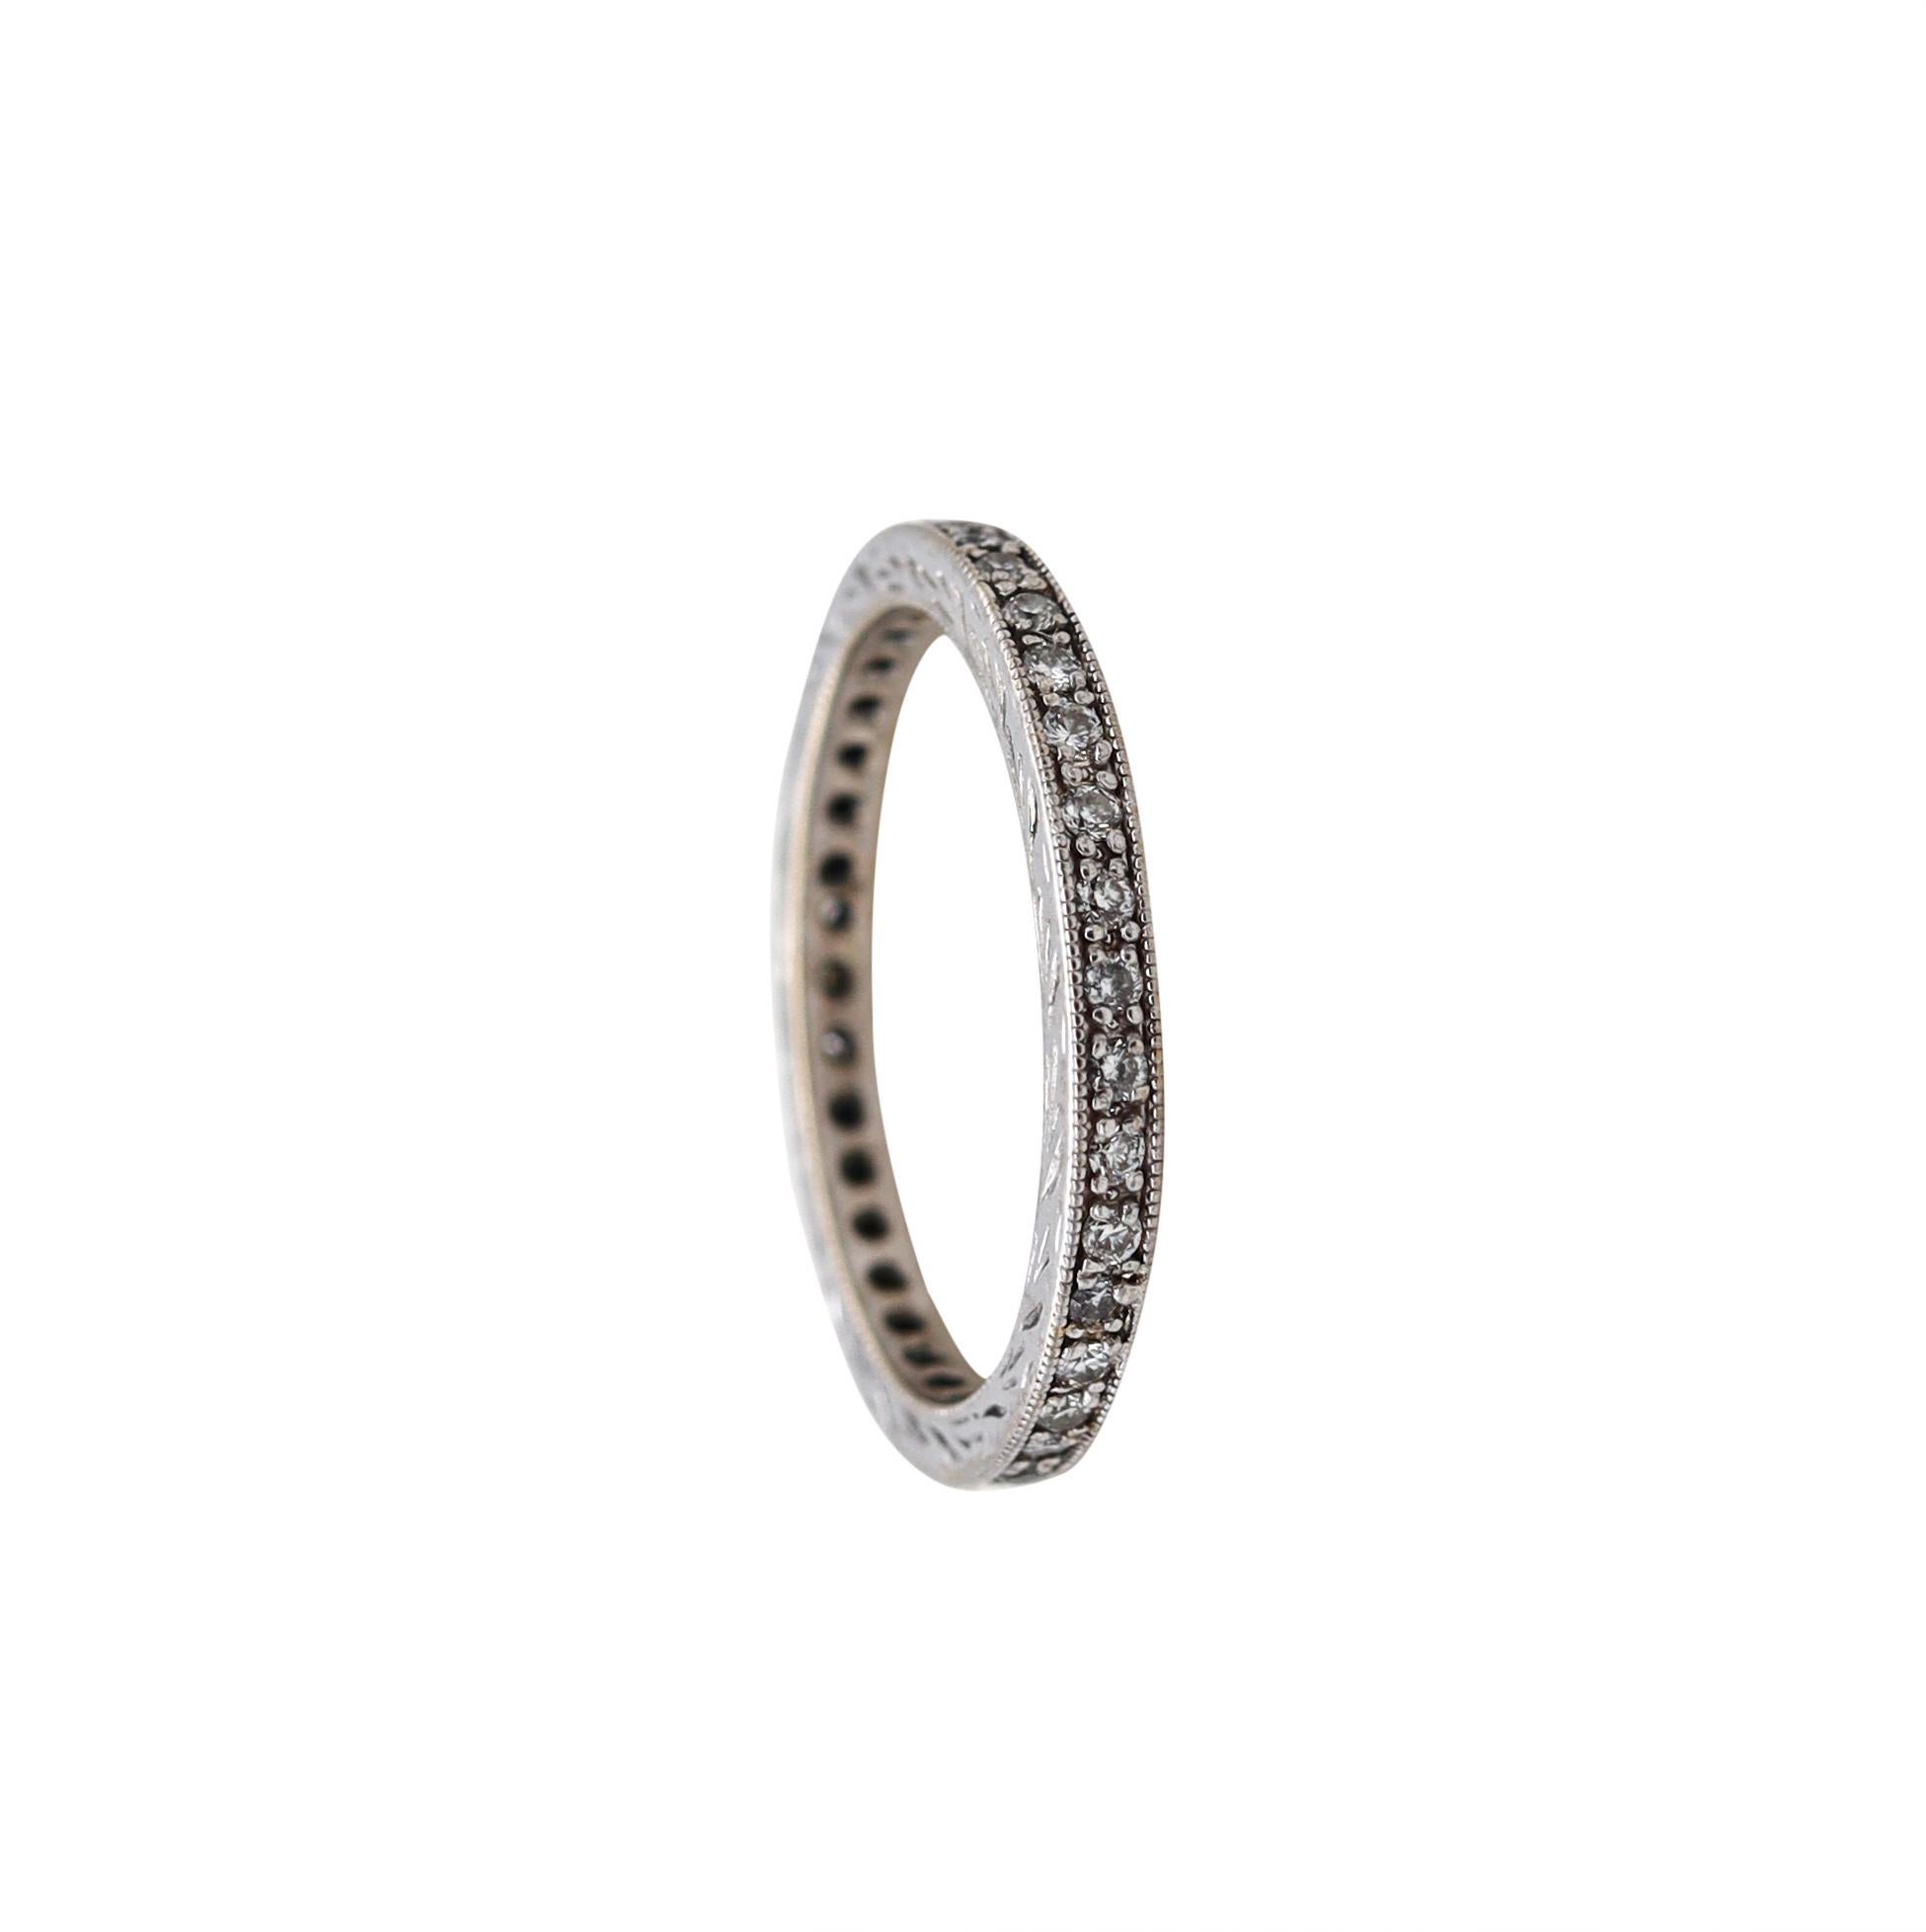 Eternity ring with Round Diamonds.

Beautiful vintage gem set ring band carefully crafted in solid white gold of 18 karats, with high polished finish and with the sides decorated with wreaths. It is mounted in a flat buttons prongs setting, with 38